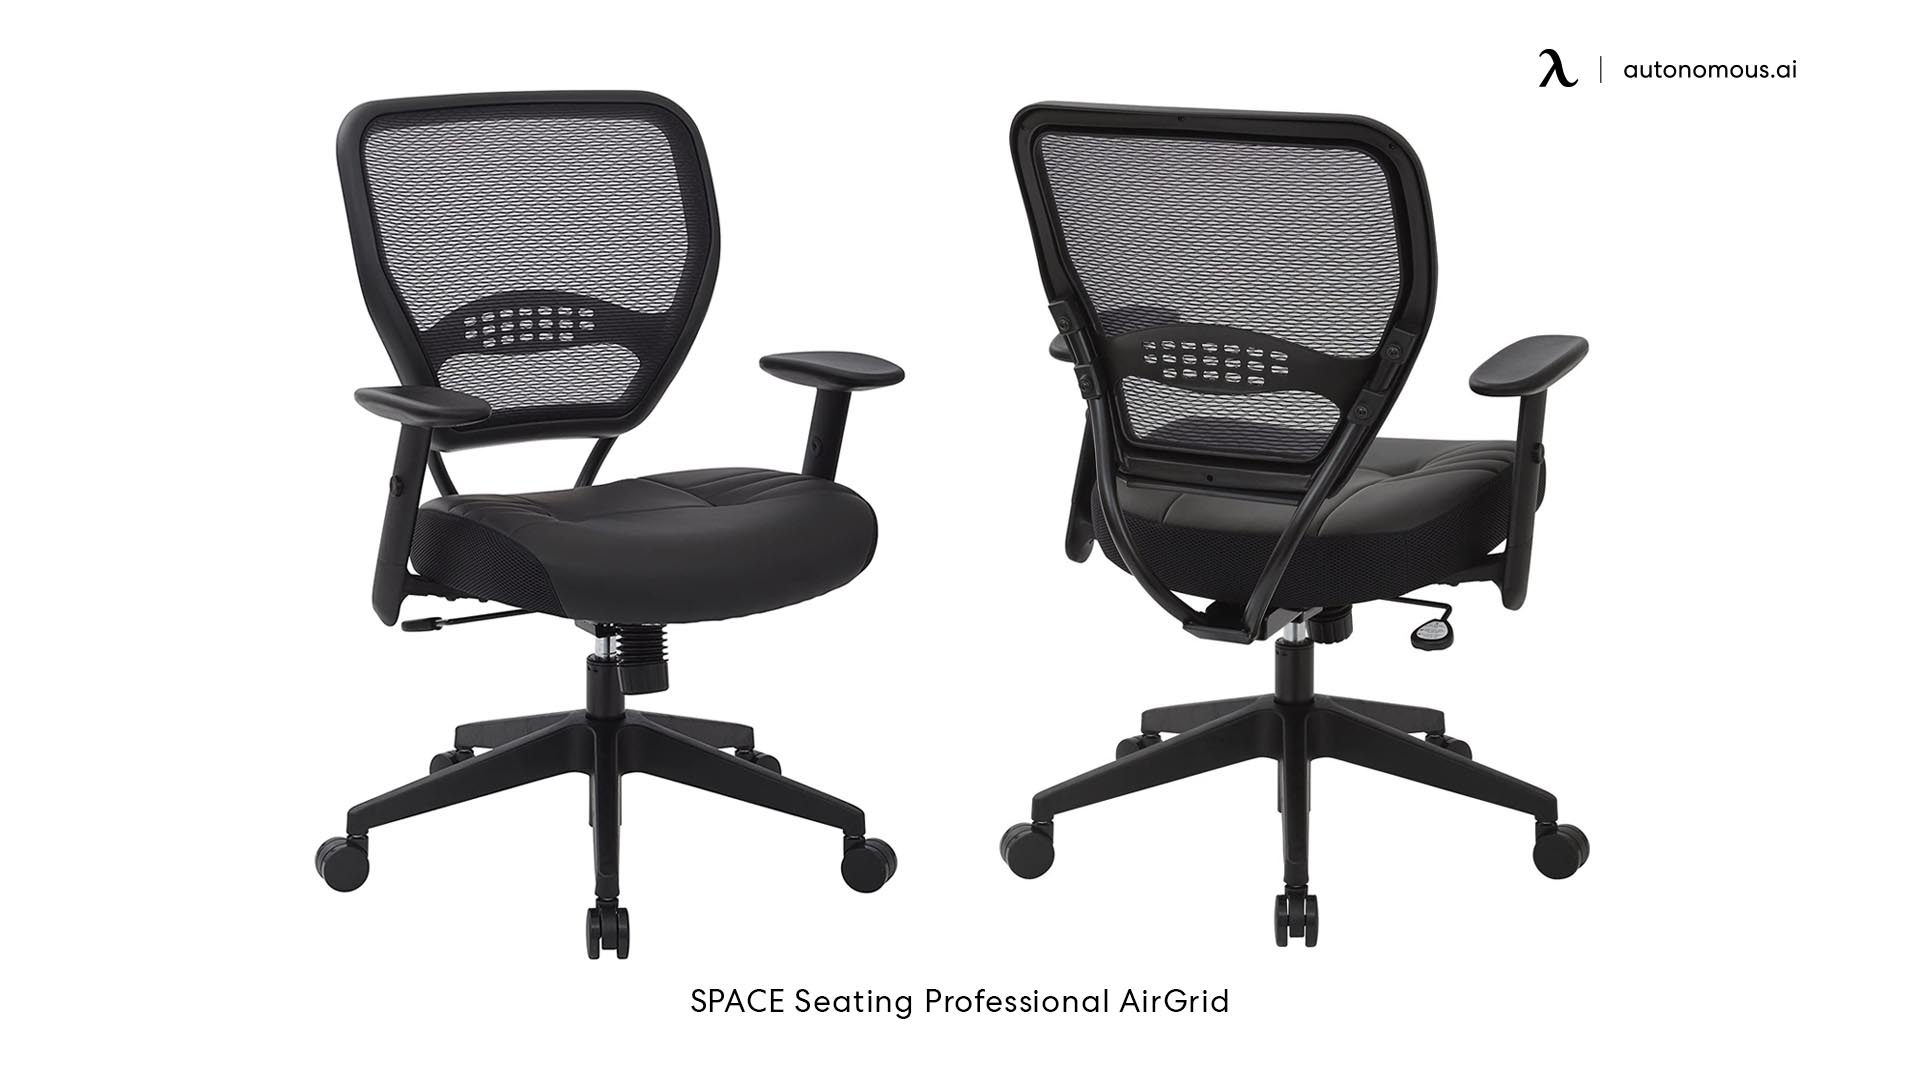 Space Seating Professional AirGrid stylish home office chair